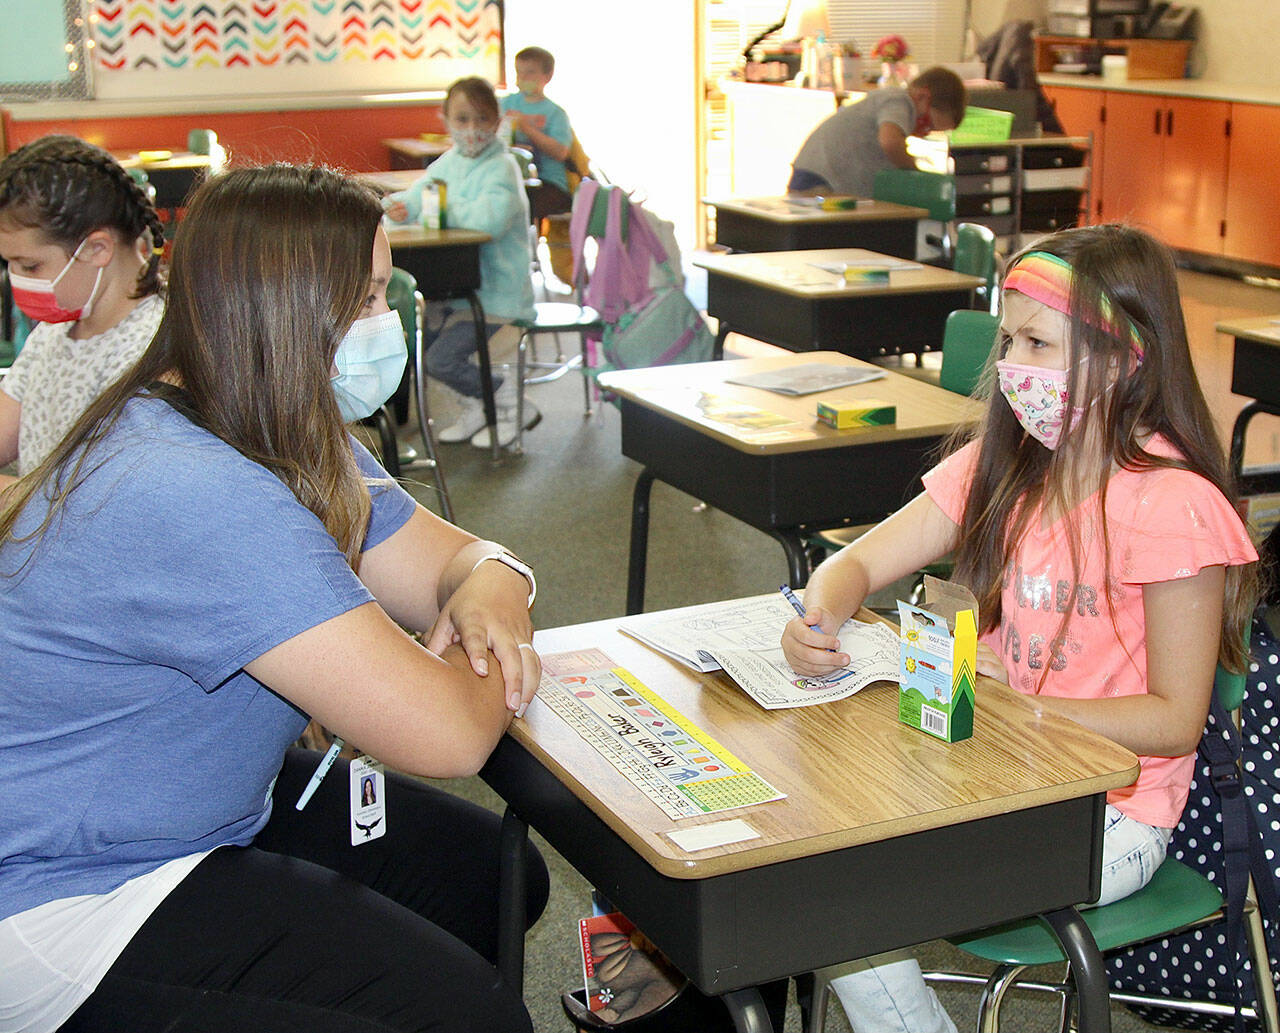 Ryleigh Baker talks with her new teacher, Mrs. Johnson, in the beginning moments of the school day. Each student was given crayons and a coloring book to engage them until everyone arrived. (Dave Logan/For Peninsula Daily News)